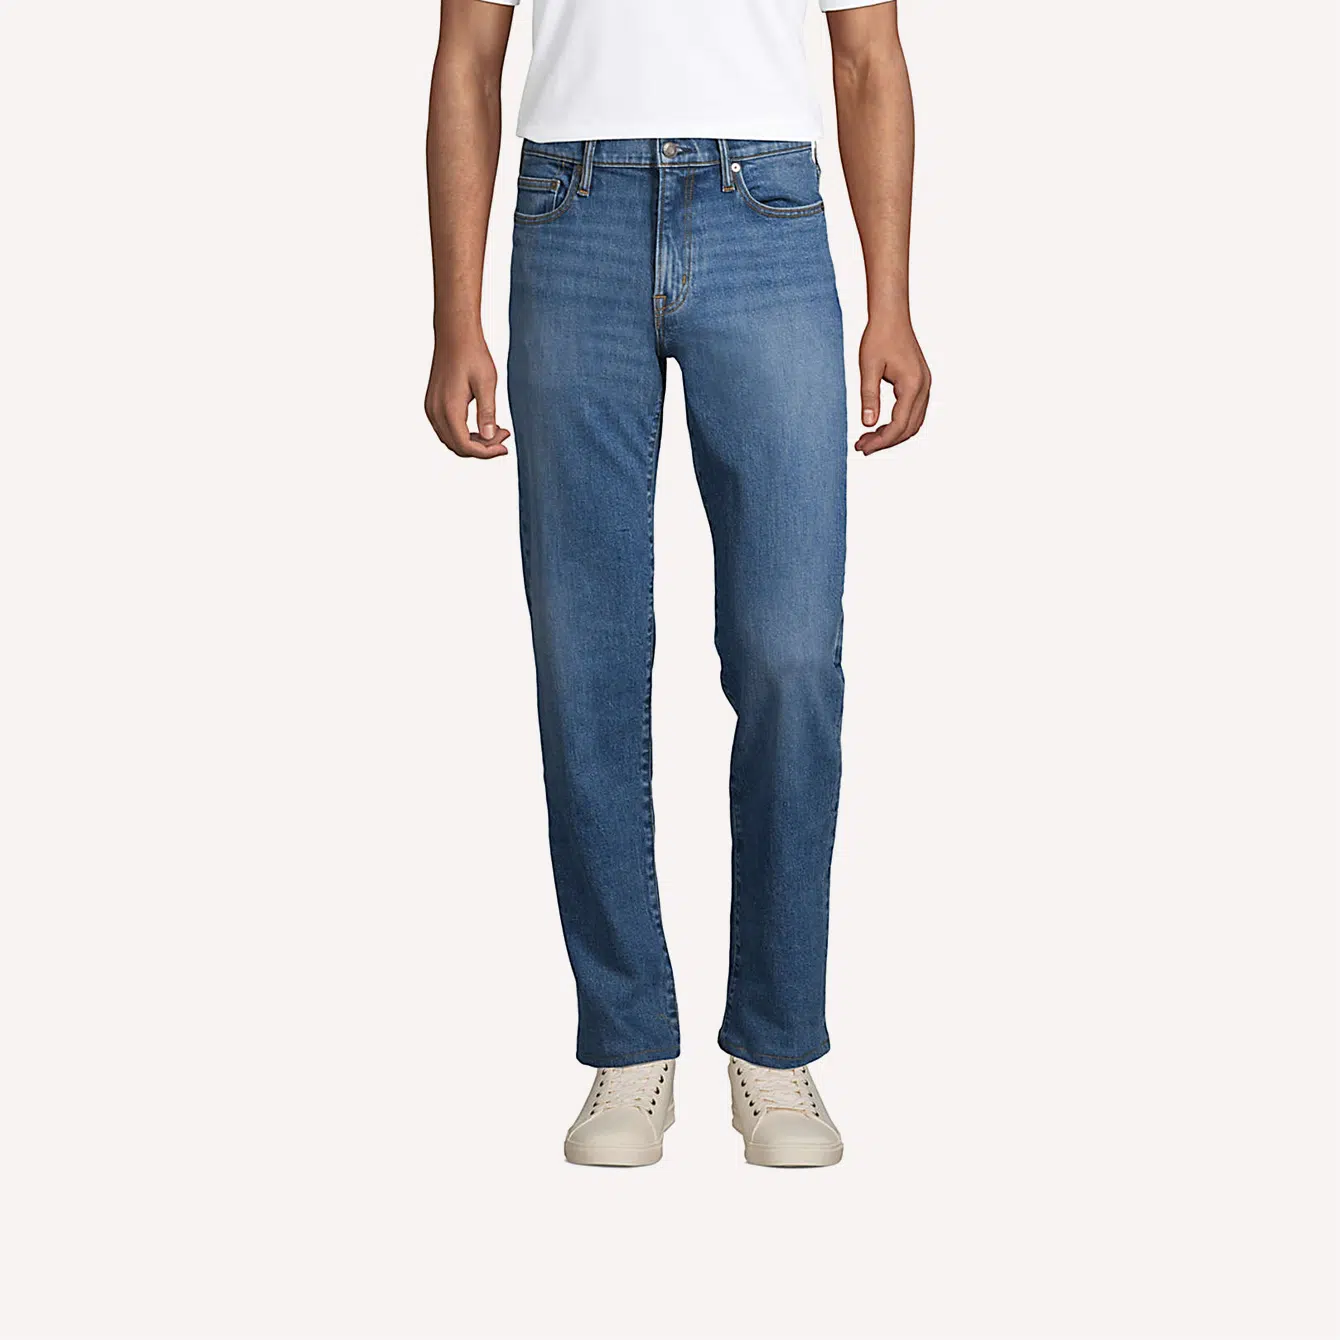 Landsend Traditional fit comfort first jeans